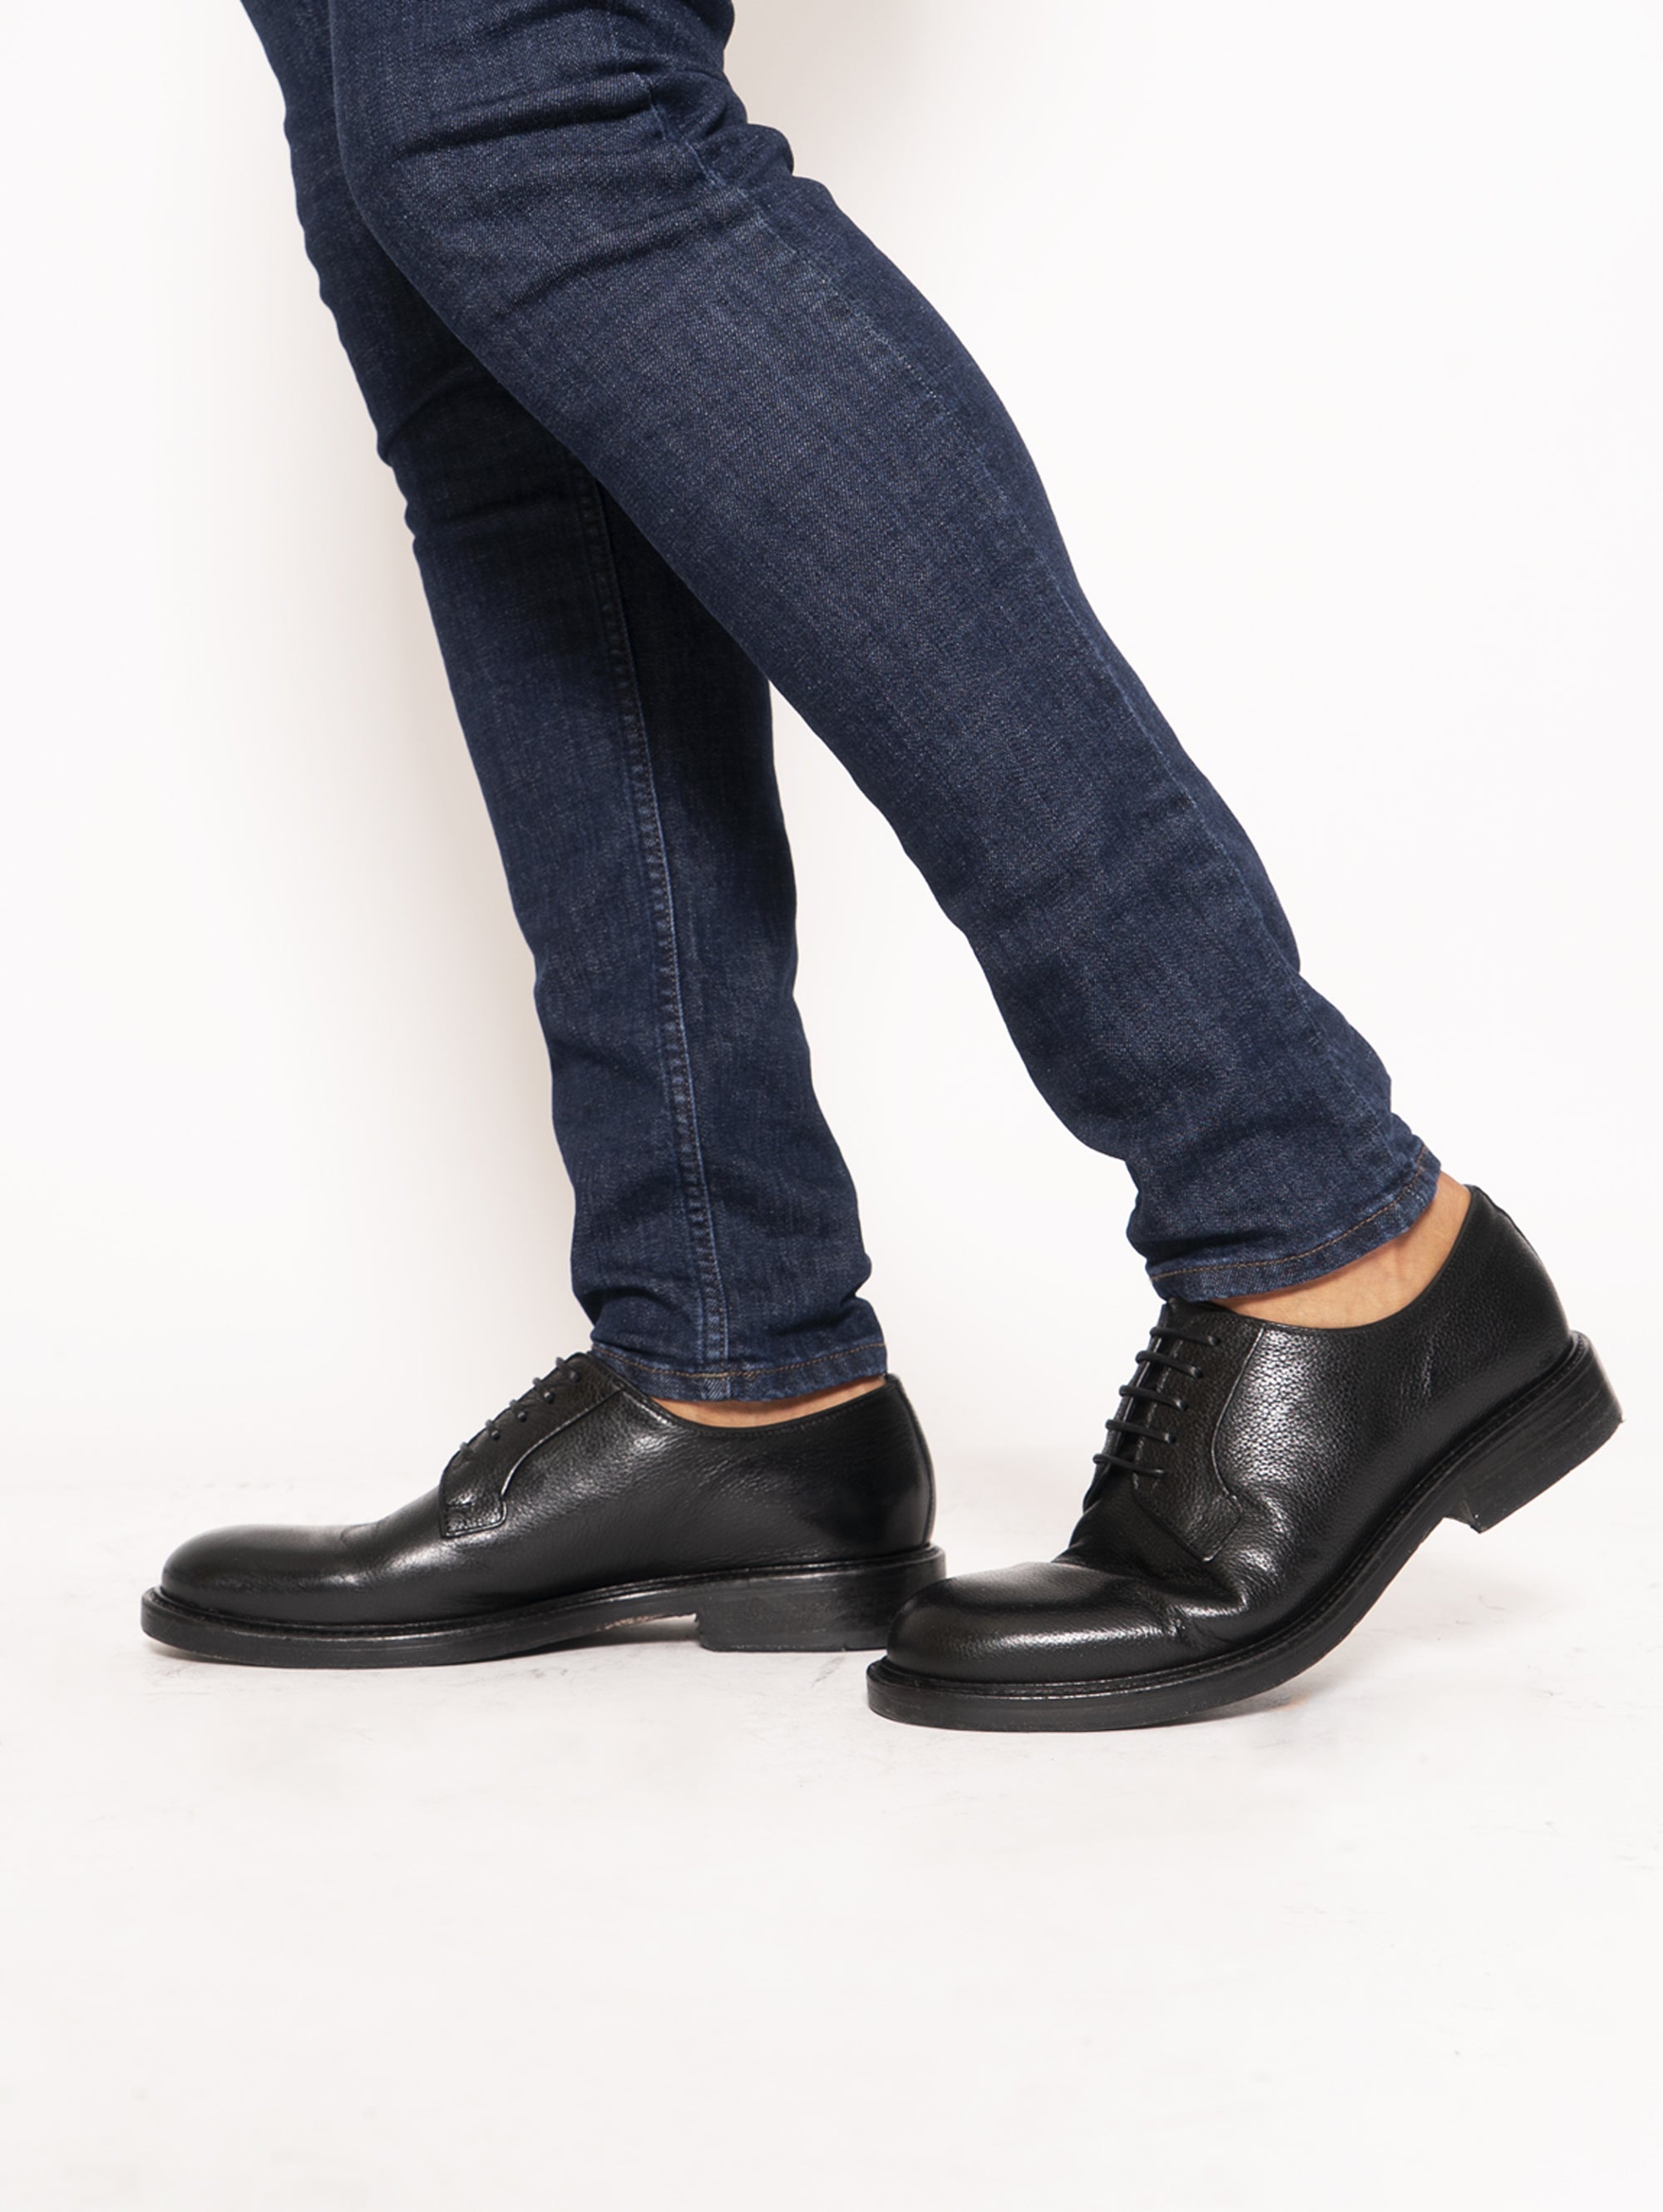 Classic derby in tumbled leather - Black